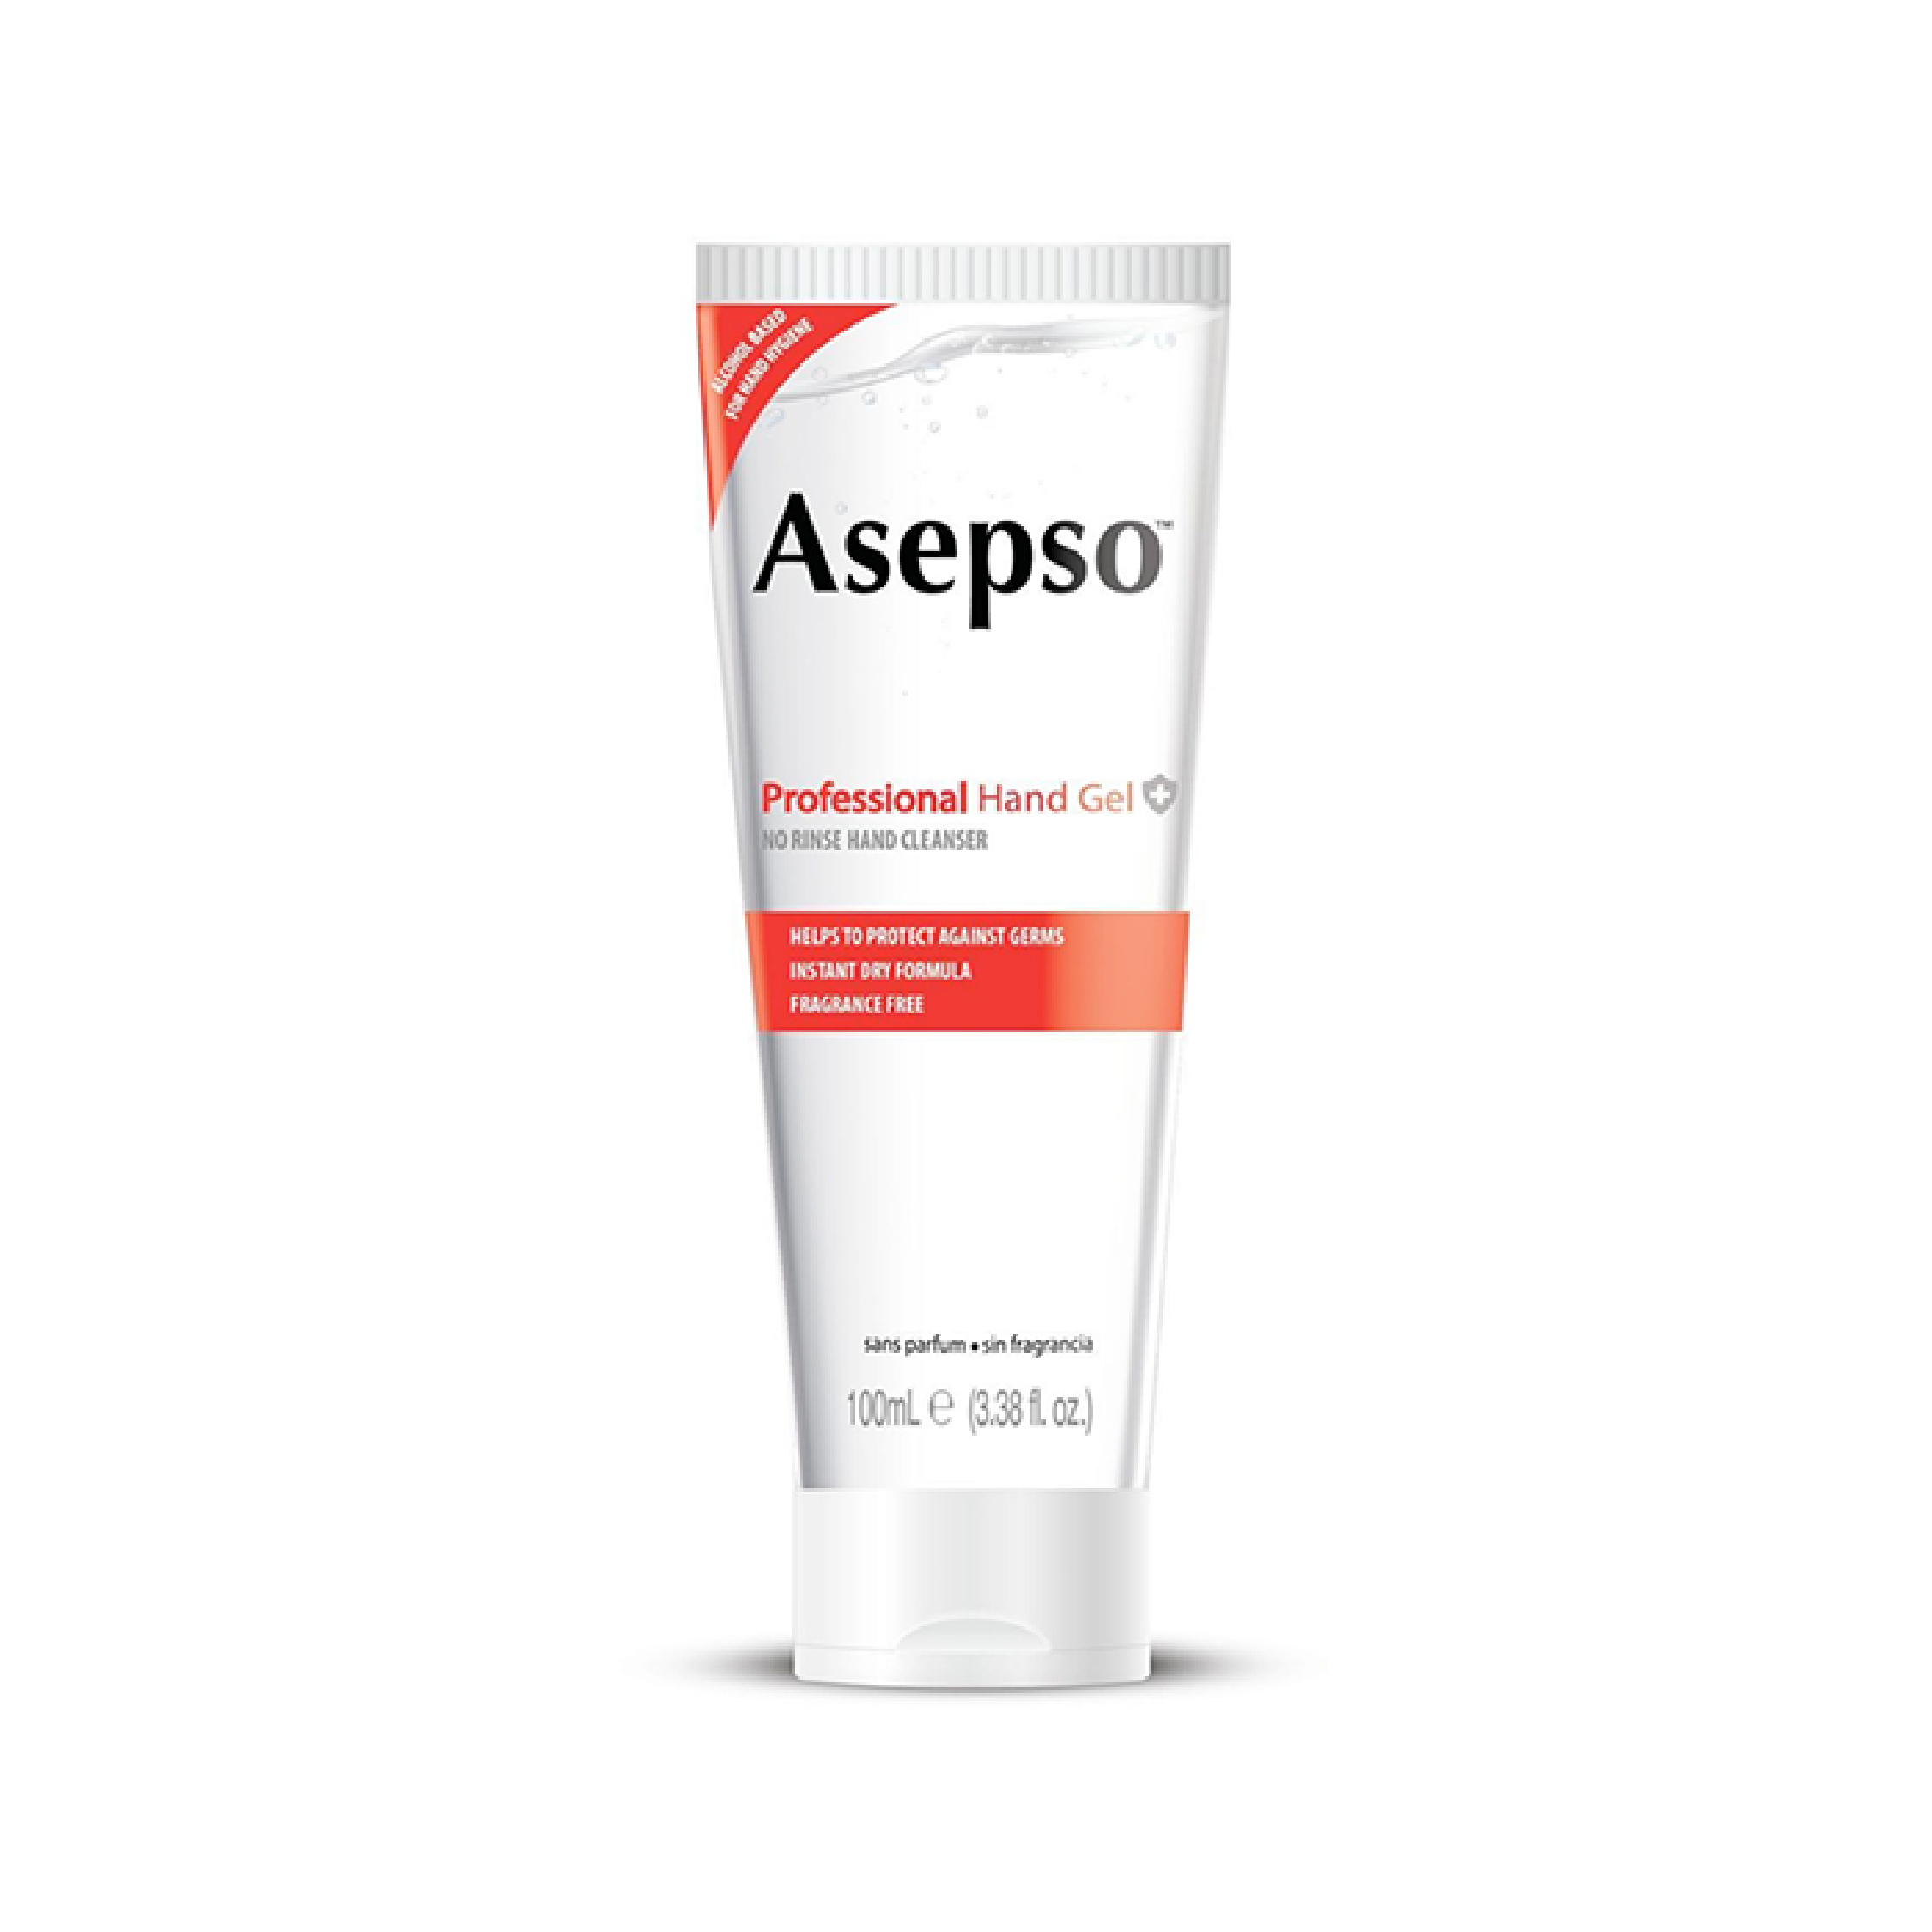 Asepso Professional Hand Gel